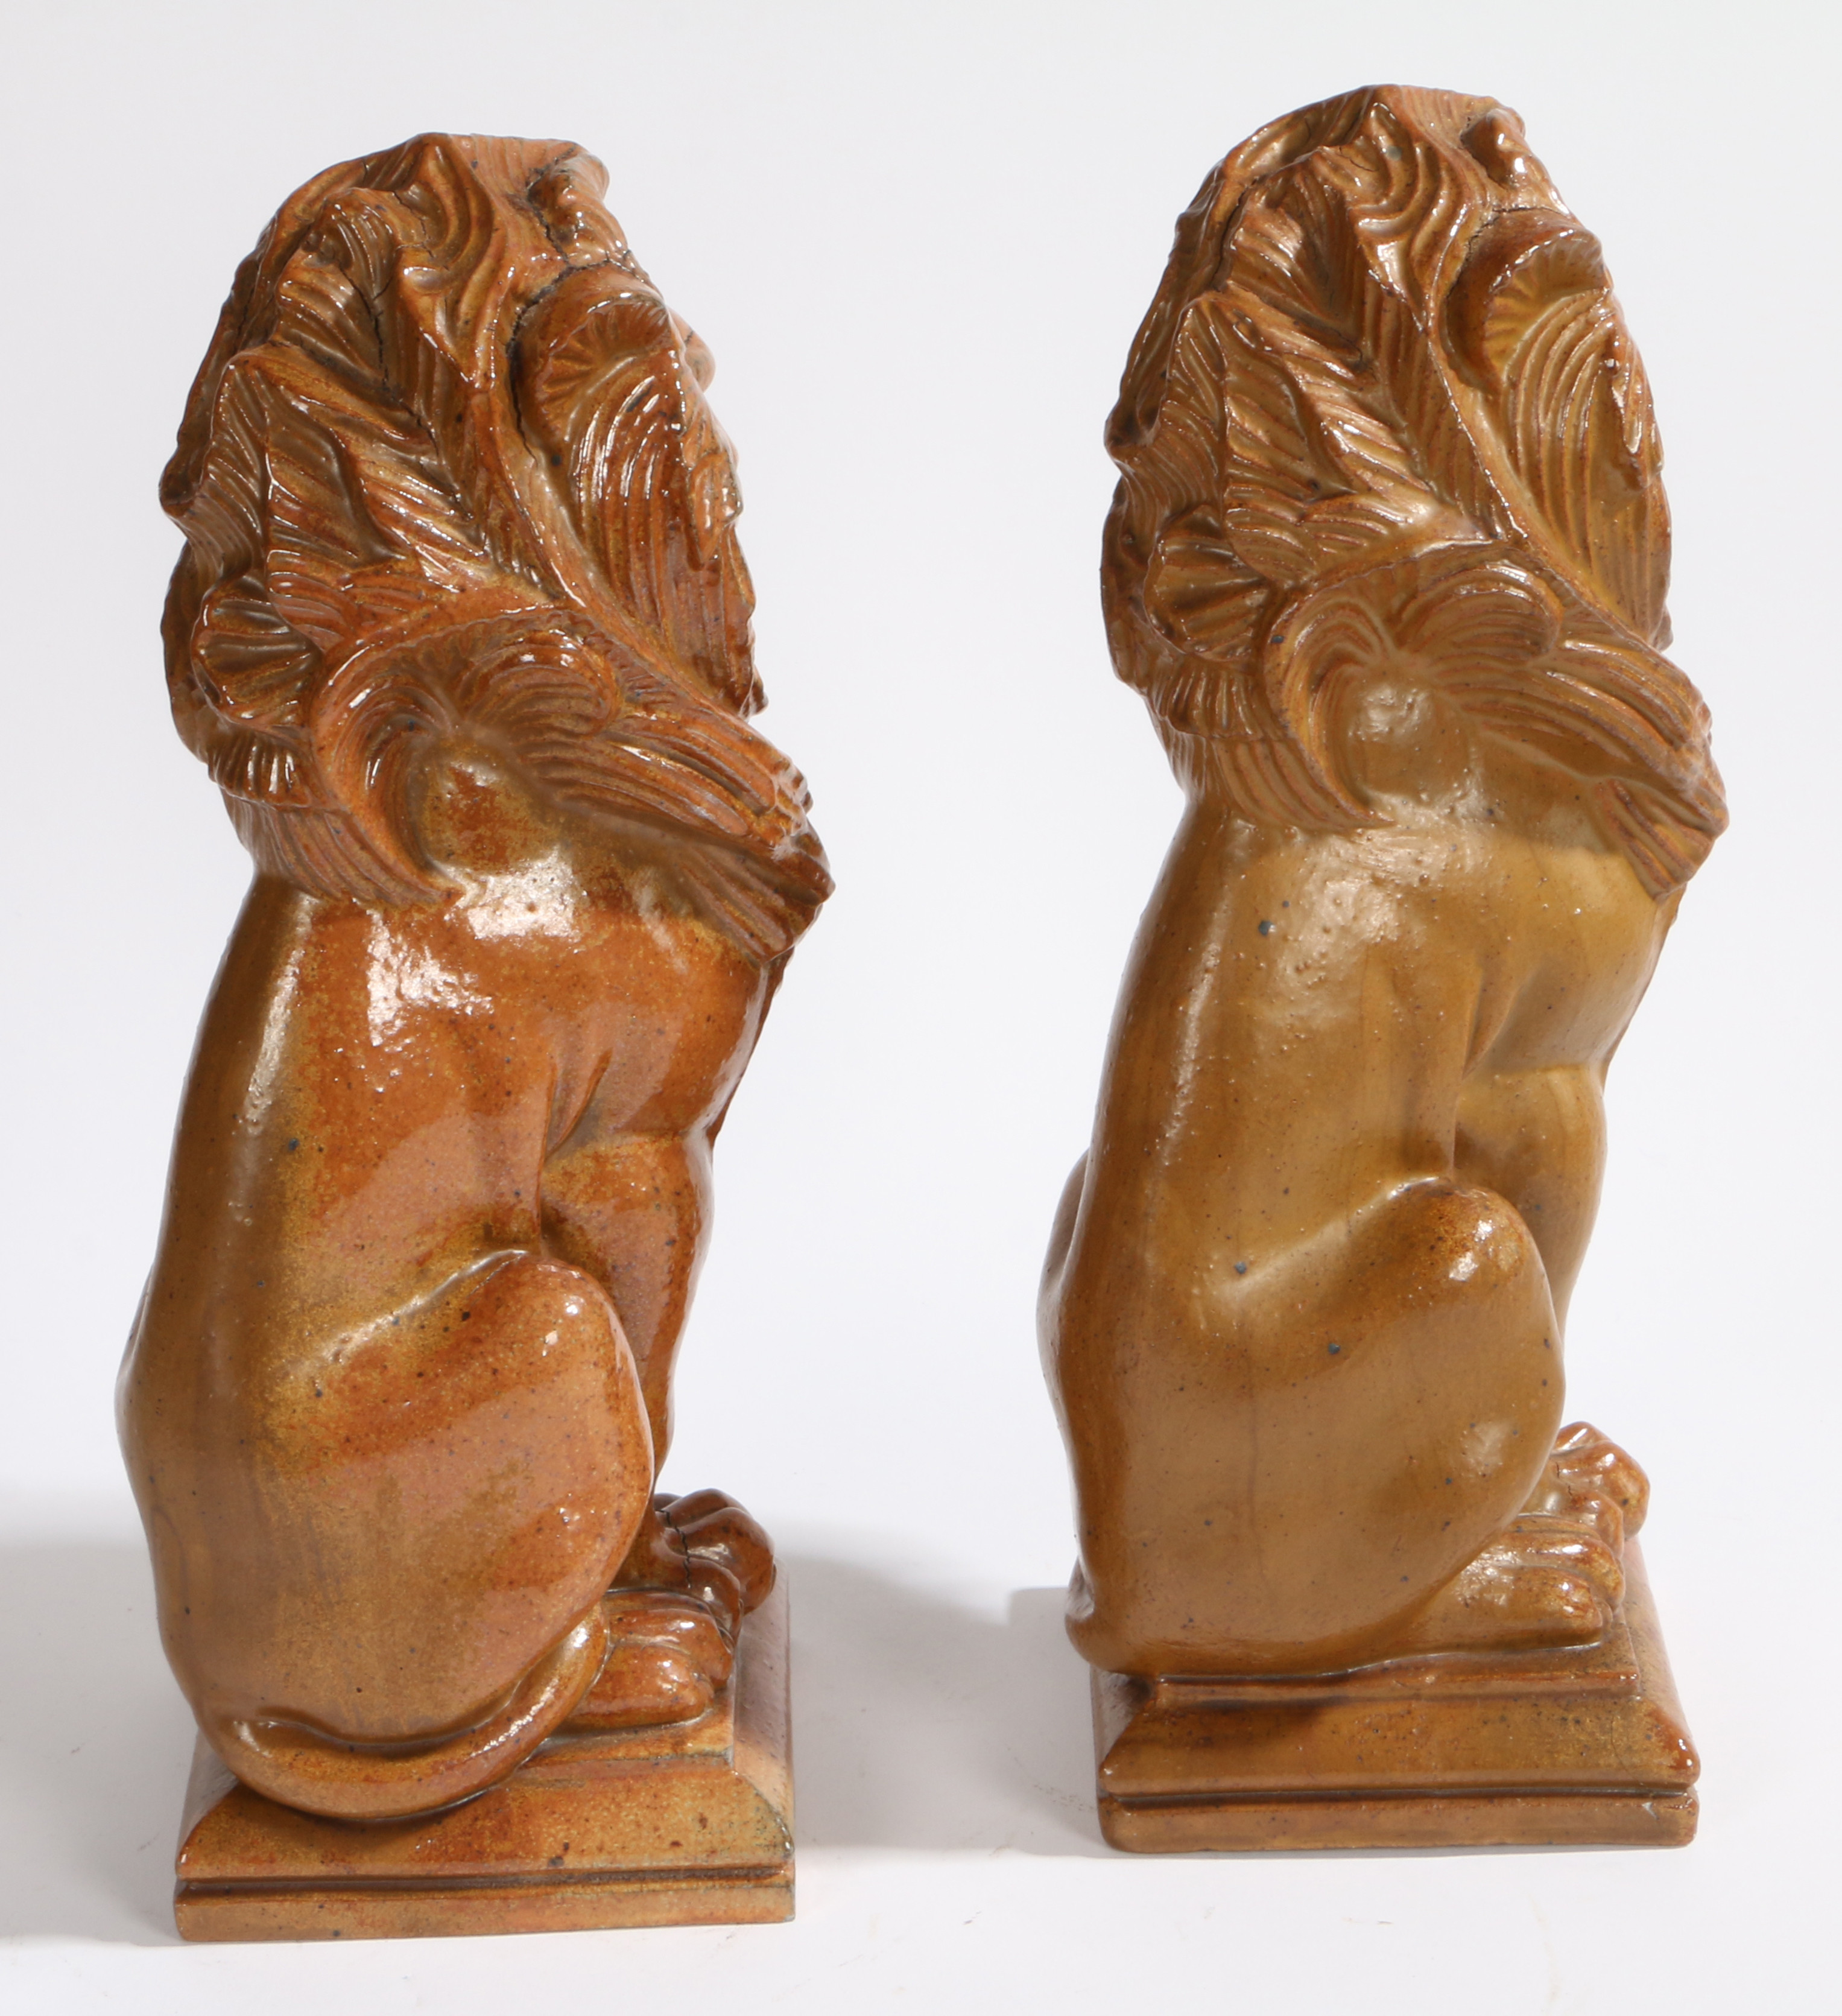 ALFRED G HOPKINS (1884-1940), A PAIR OF SALT GLAZED STONEWARE LIONS. - Image 2 of 4